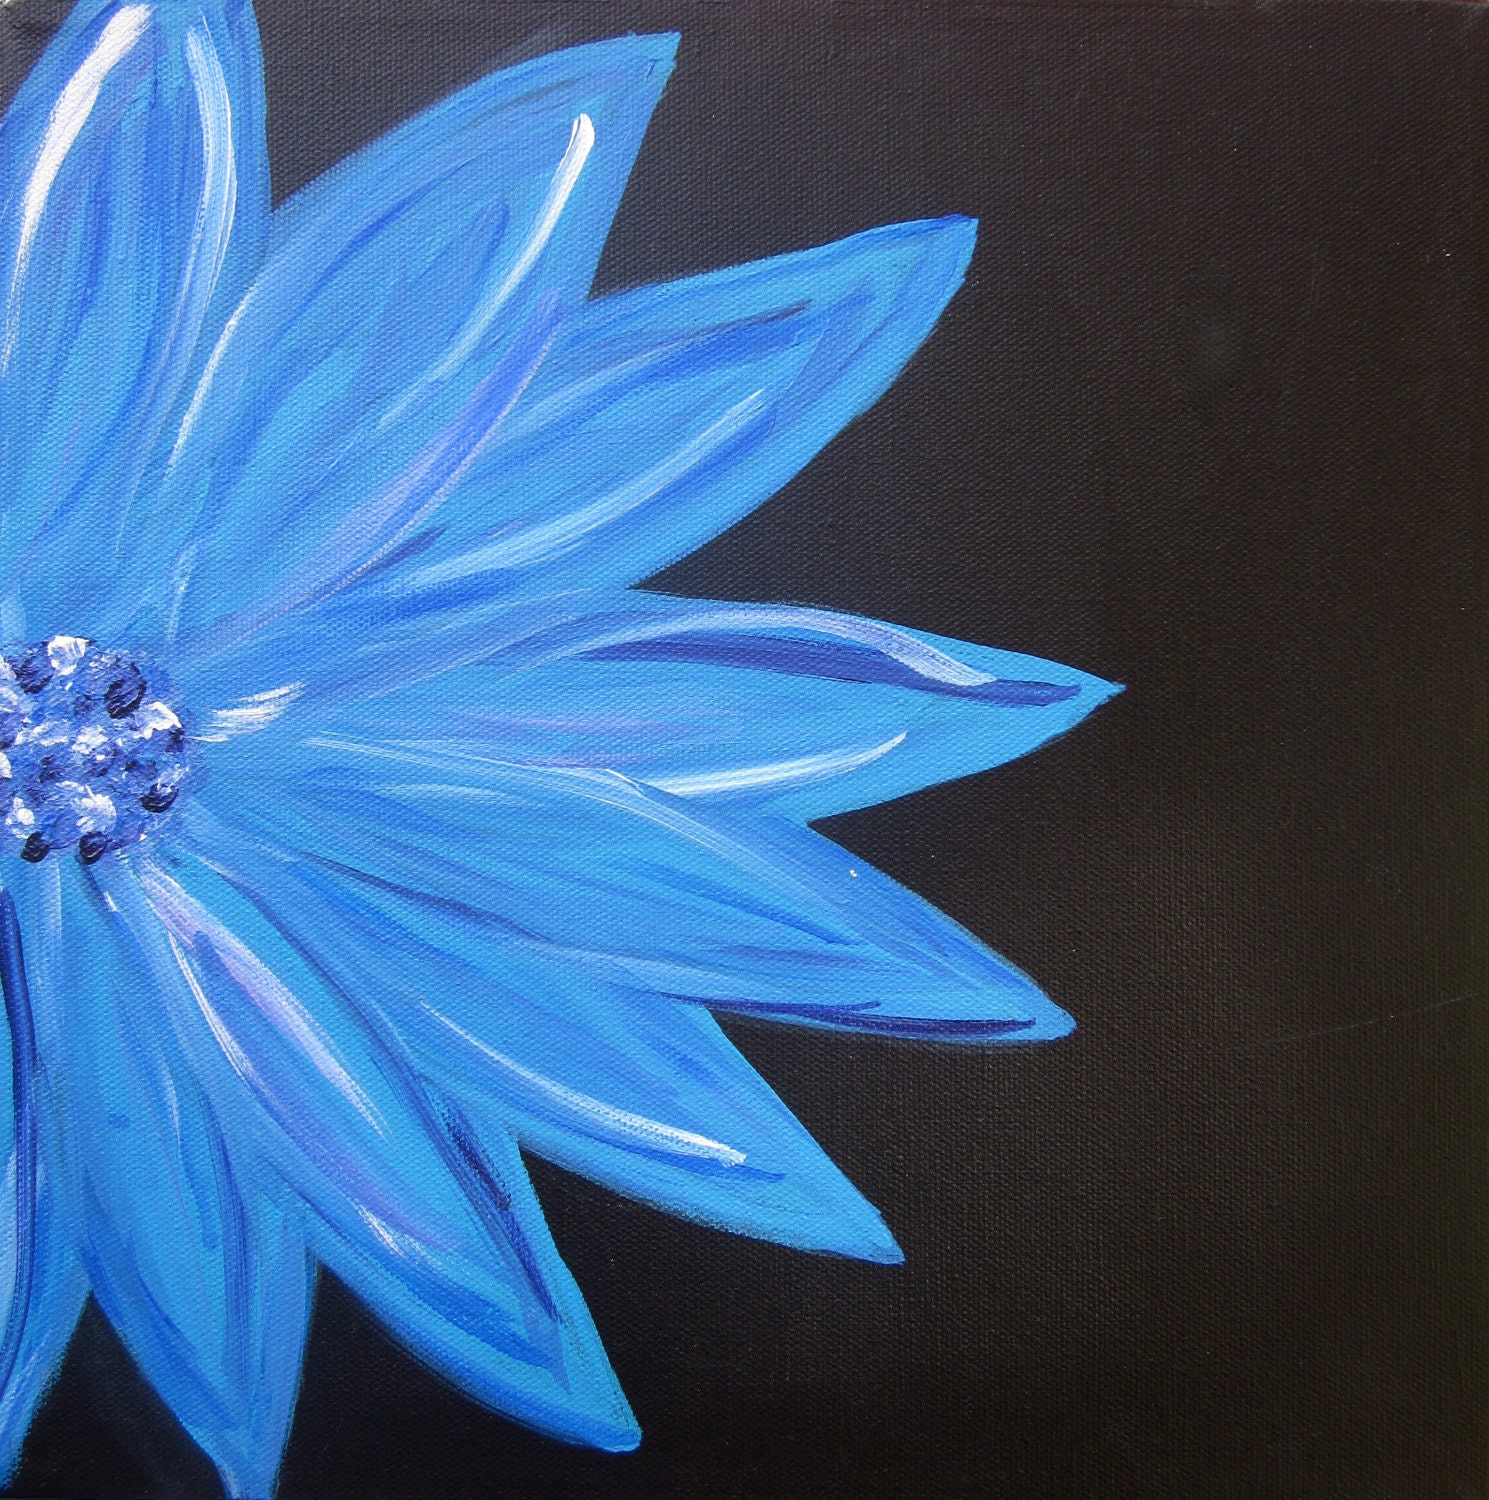  Blue  Flower  12x12 Original Abstract  Painting